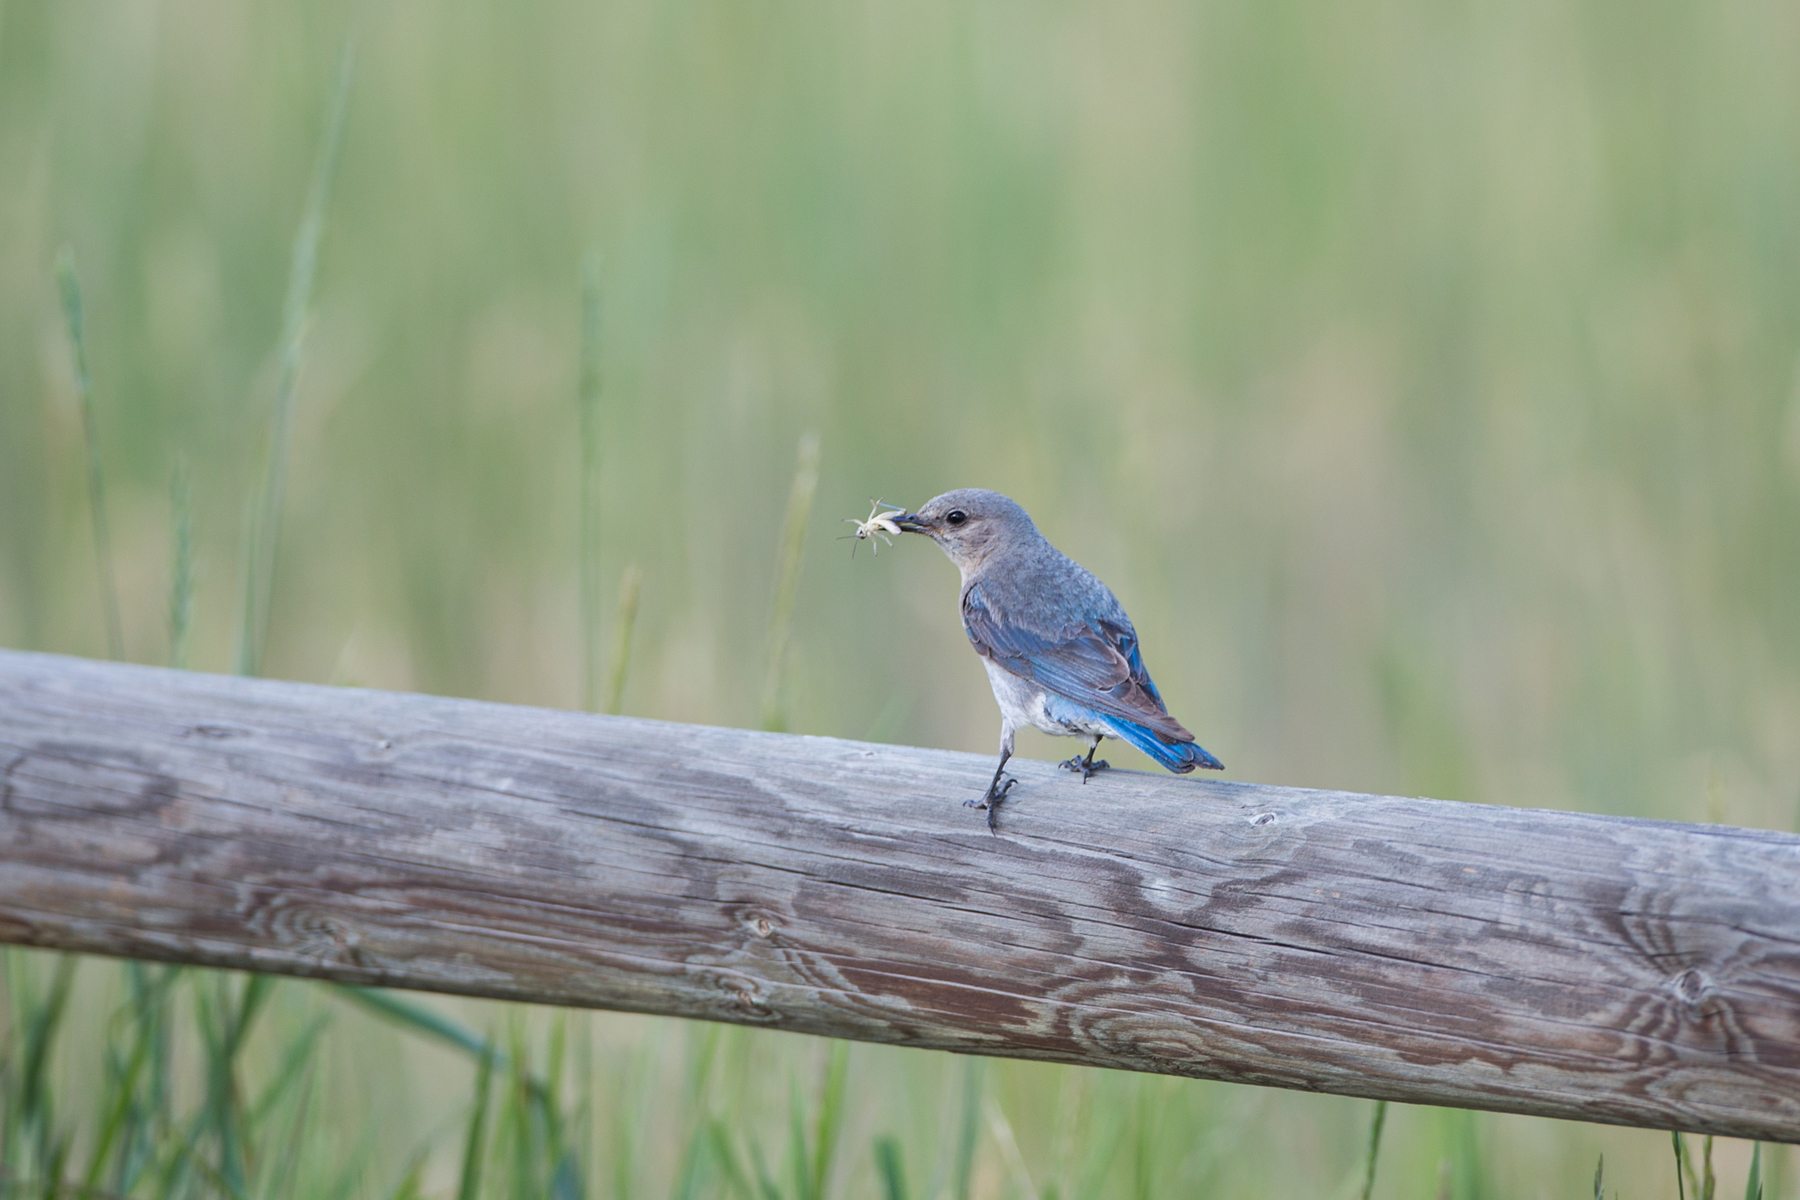 Mountain Bluebird fledgling with grasshopper, Red Lodge, MT.  Click for next photo.